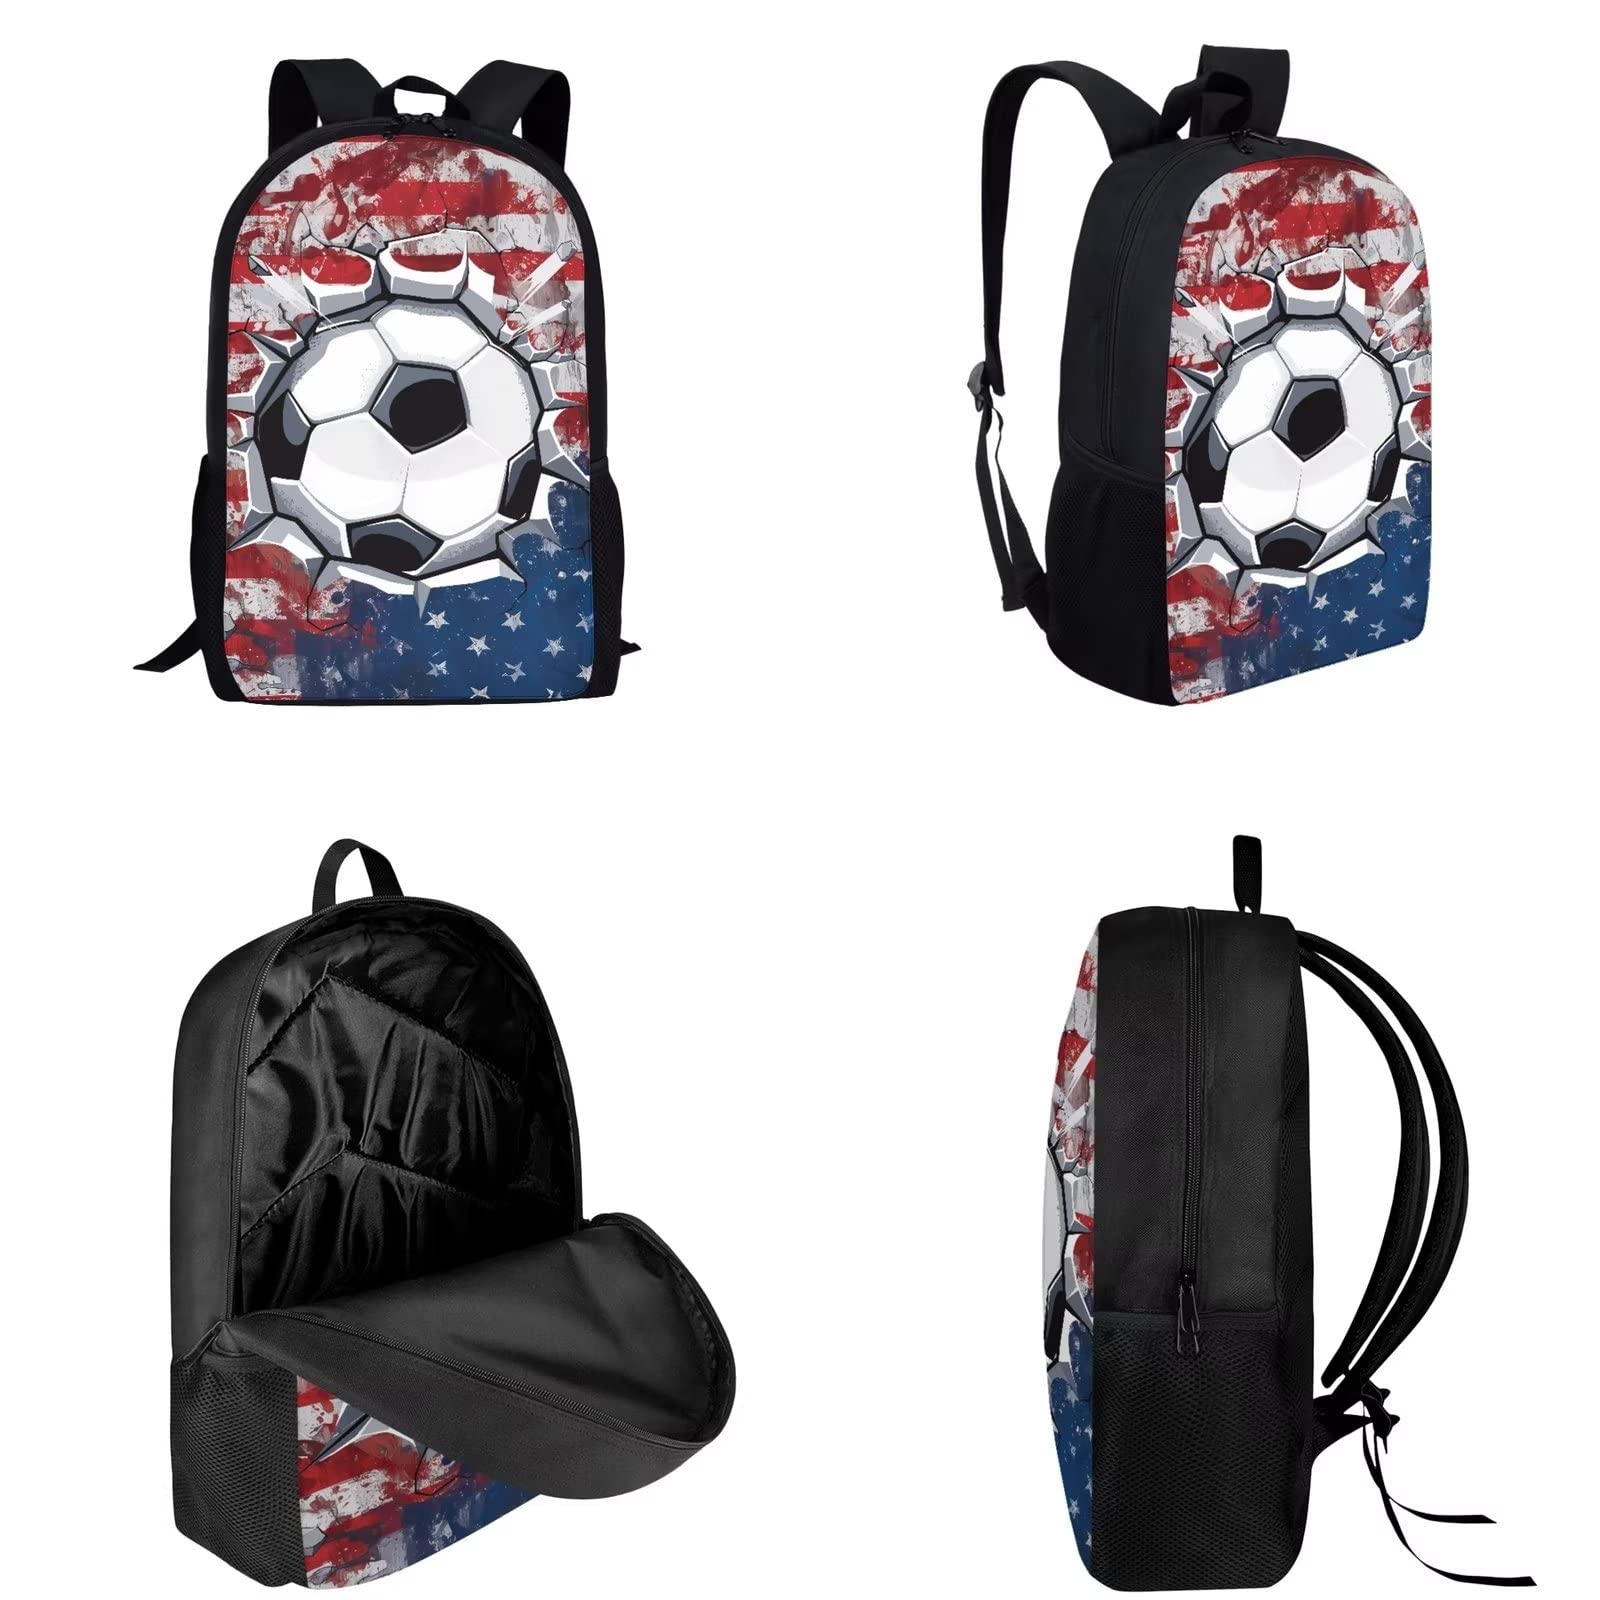 PCSJRKG Patriotic American Flag Casual Daypack Set for Teen Girls, 3D Soccer Backpack Set with Insulated Lunch Box and Pen Bag, Large Lightweight School Bag Set Suitable for Boys and Girls